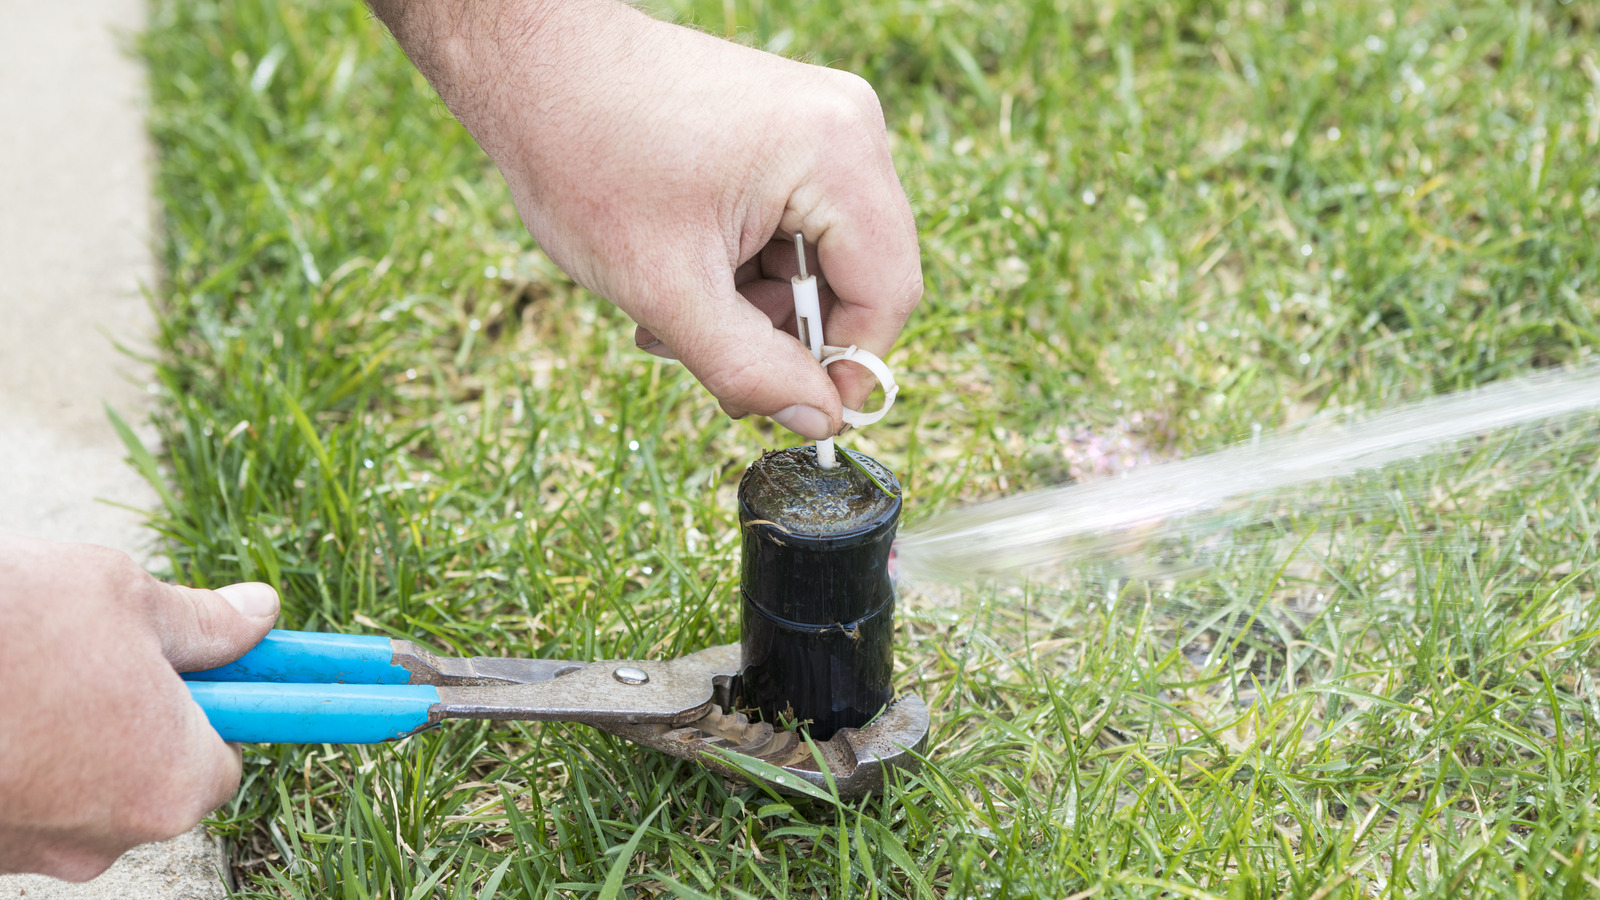 https://www.housedigest.com/img/gallery/how-often-should-you-be-cleaning-your-lawn-sprinkler-heads/l-intro-1689161401.jpg